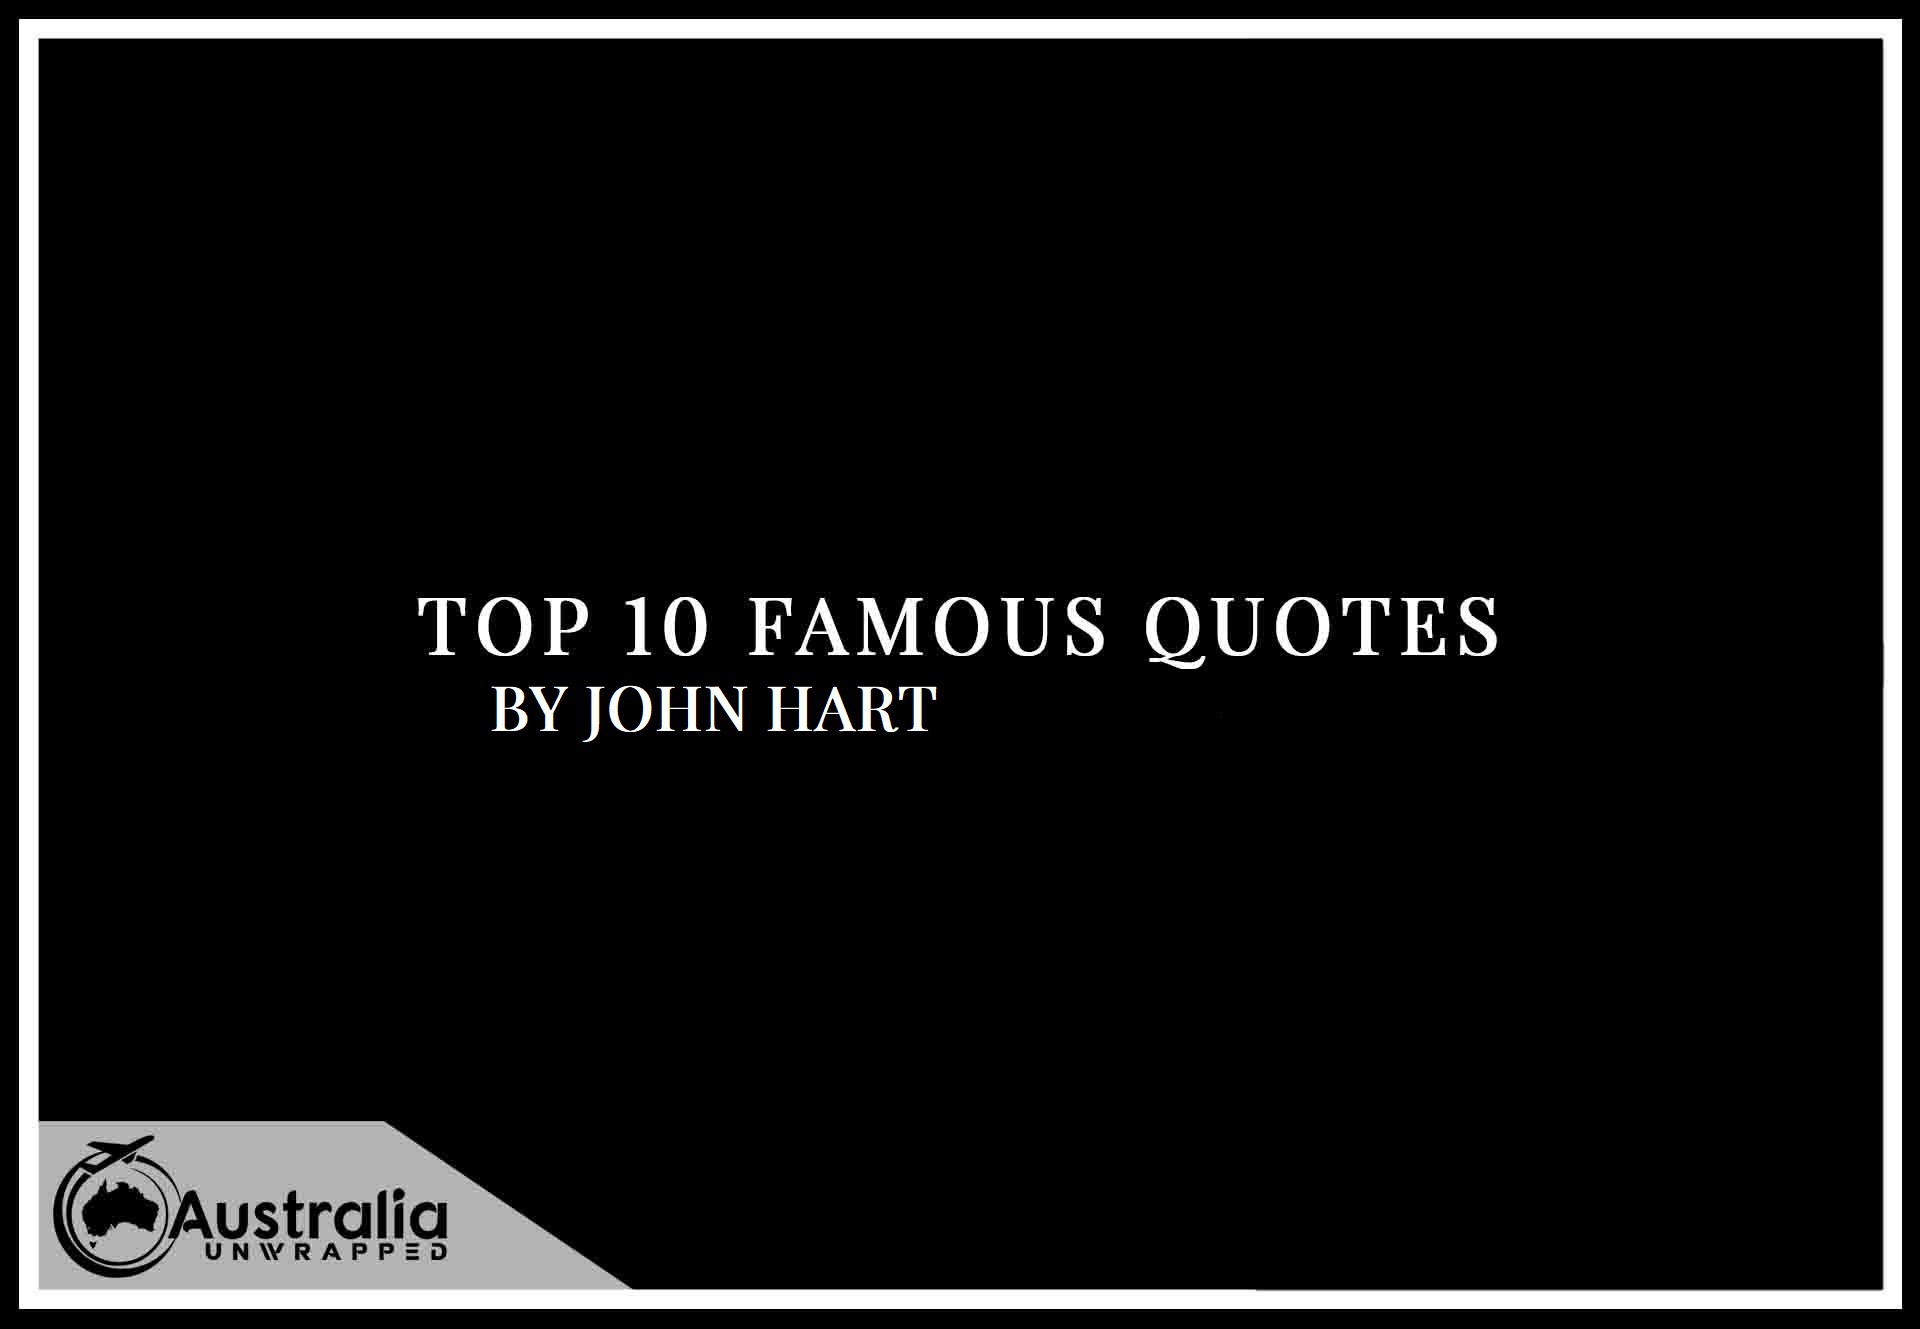 Top 10 Famous Quotes by Author John Hart